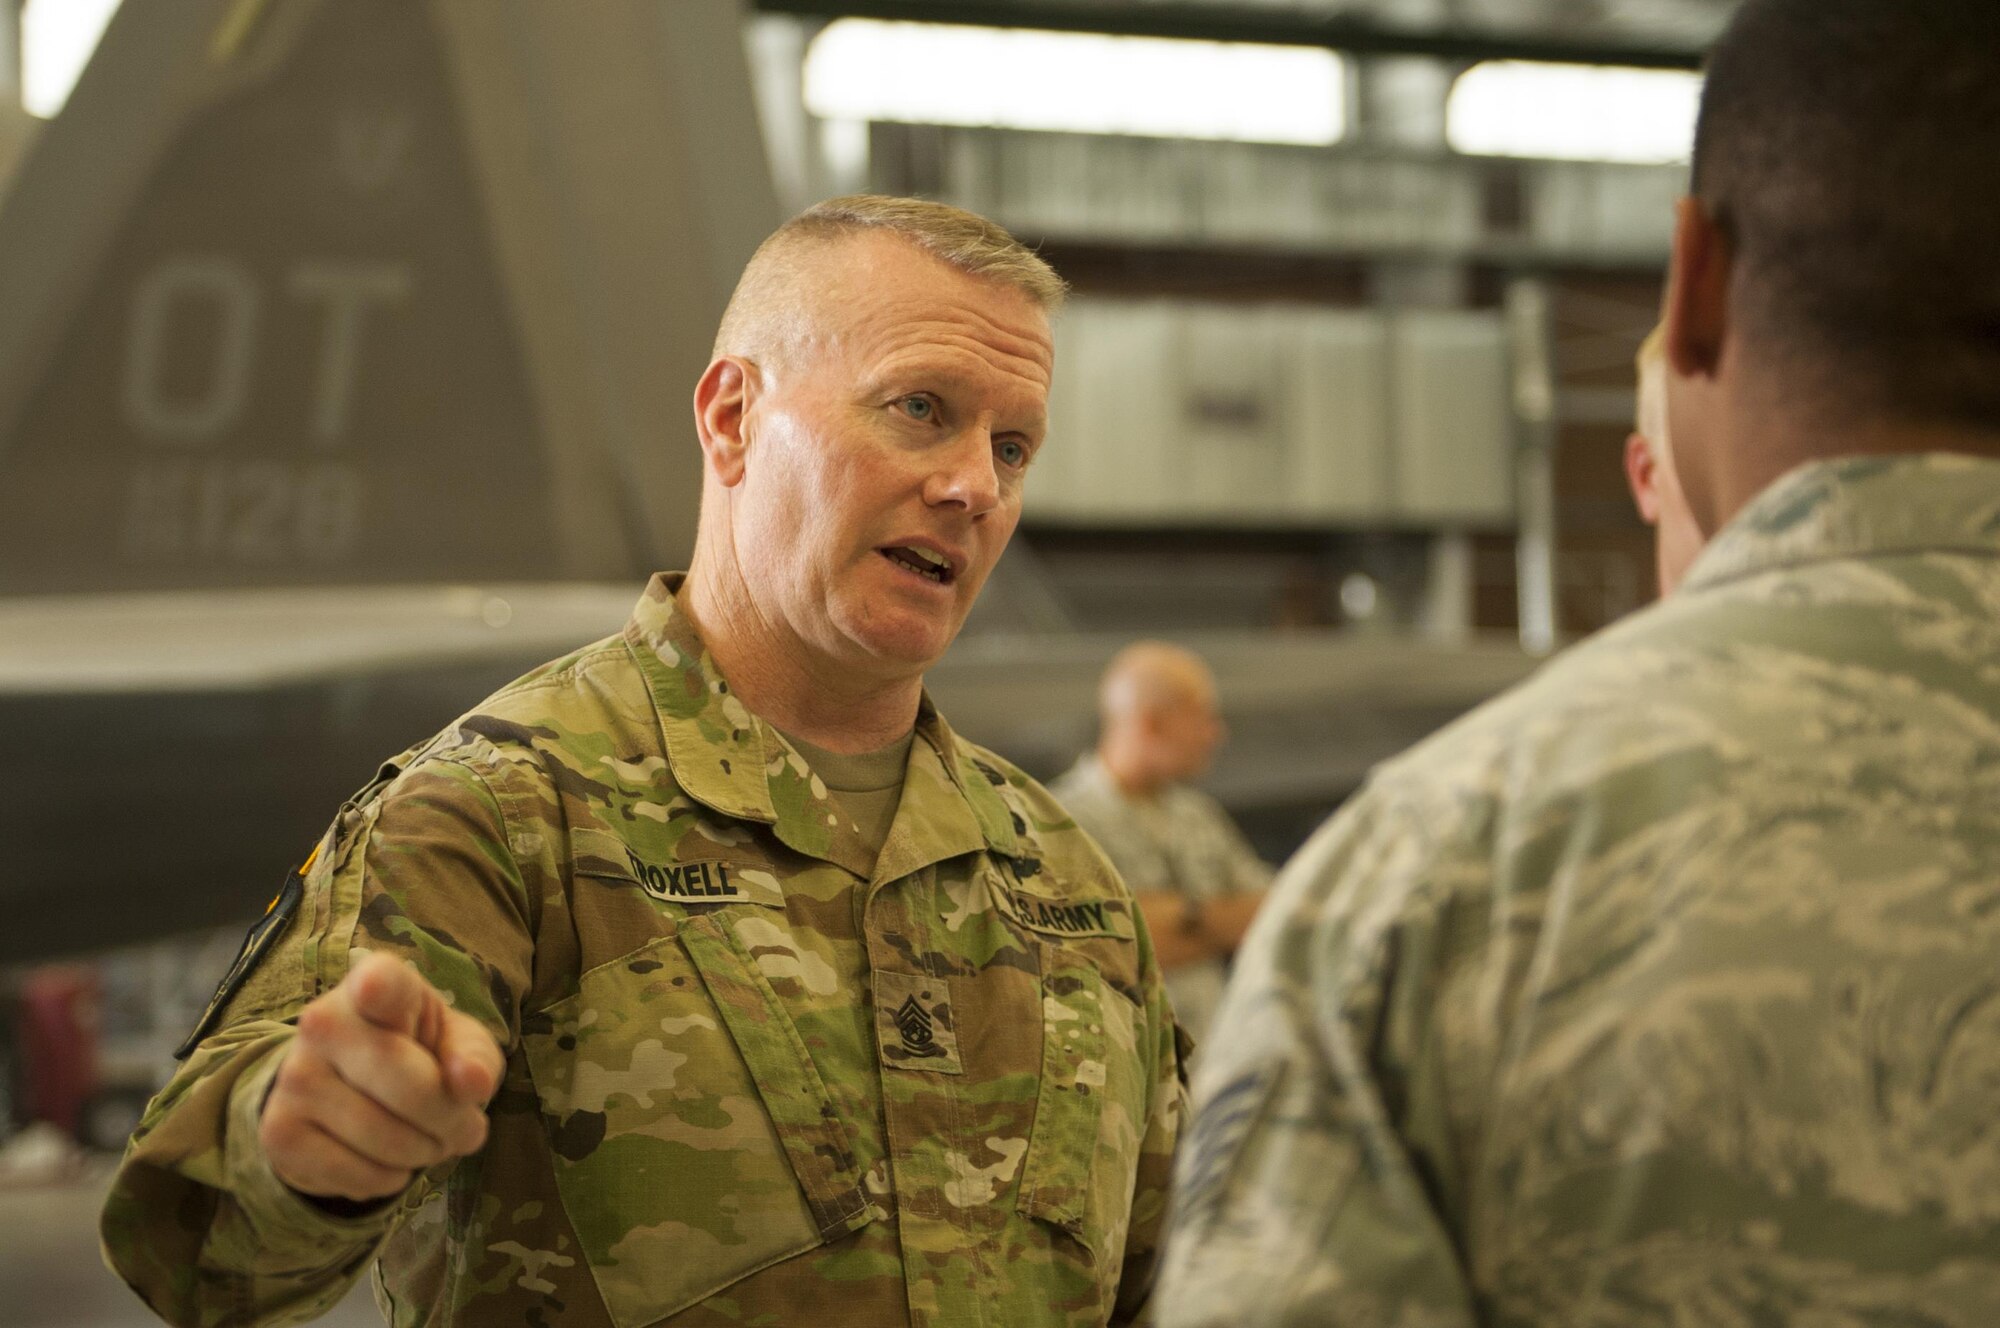 Army Command Sgt. Maj. John Troxell, Senior Enlisted Advisor to the Chairman of the Joint Chiefs of Staff, speaks with Airmen from the 57th Maintenance Group during a Nellis Air Force Base, Nev., visit July 10, 2017. The SEAC is appointed to serve as an advisor to the Chairman and the Secretary of Defense on all matters involving joint and combined total force integration, utilization, health of the force, and joint development for enlisted personnel. (U.S. Air Force photo by Senior Airman Joshua Kleinholz)